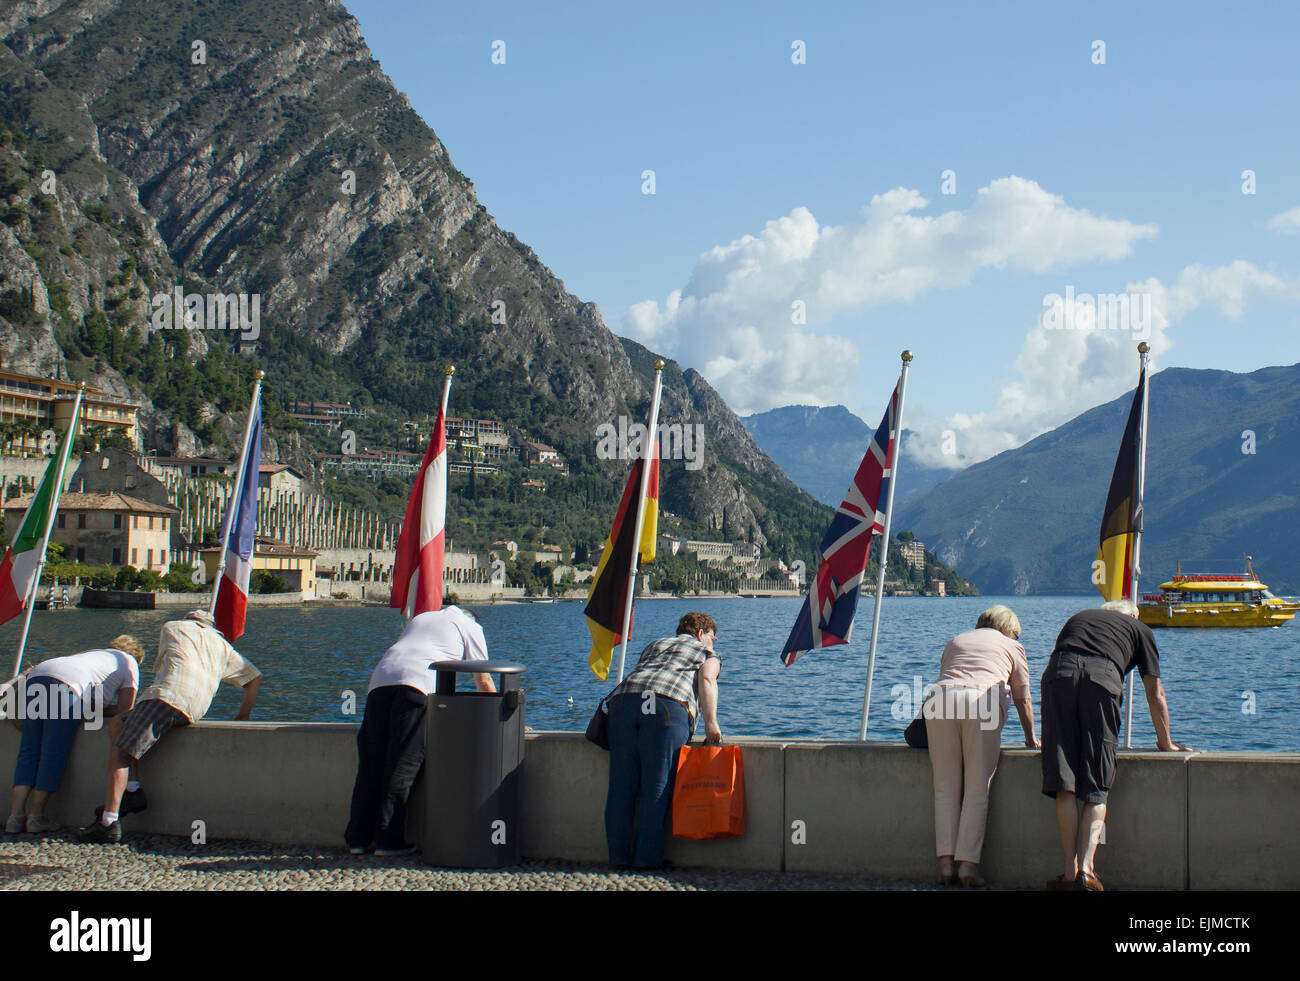 Tourists at Limone,Lake Garda, Italy, bending over a wall to view the lake, with flags of European countries on display. Stock Photo